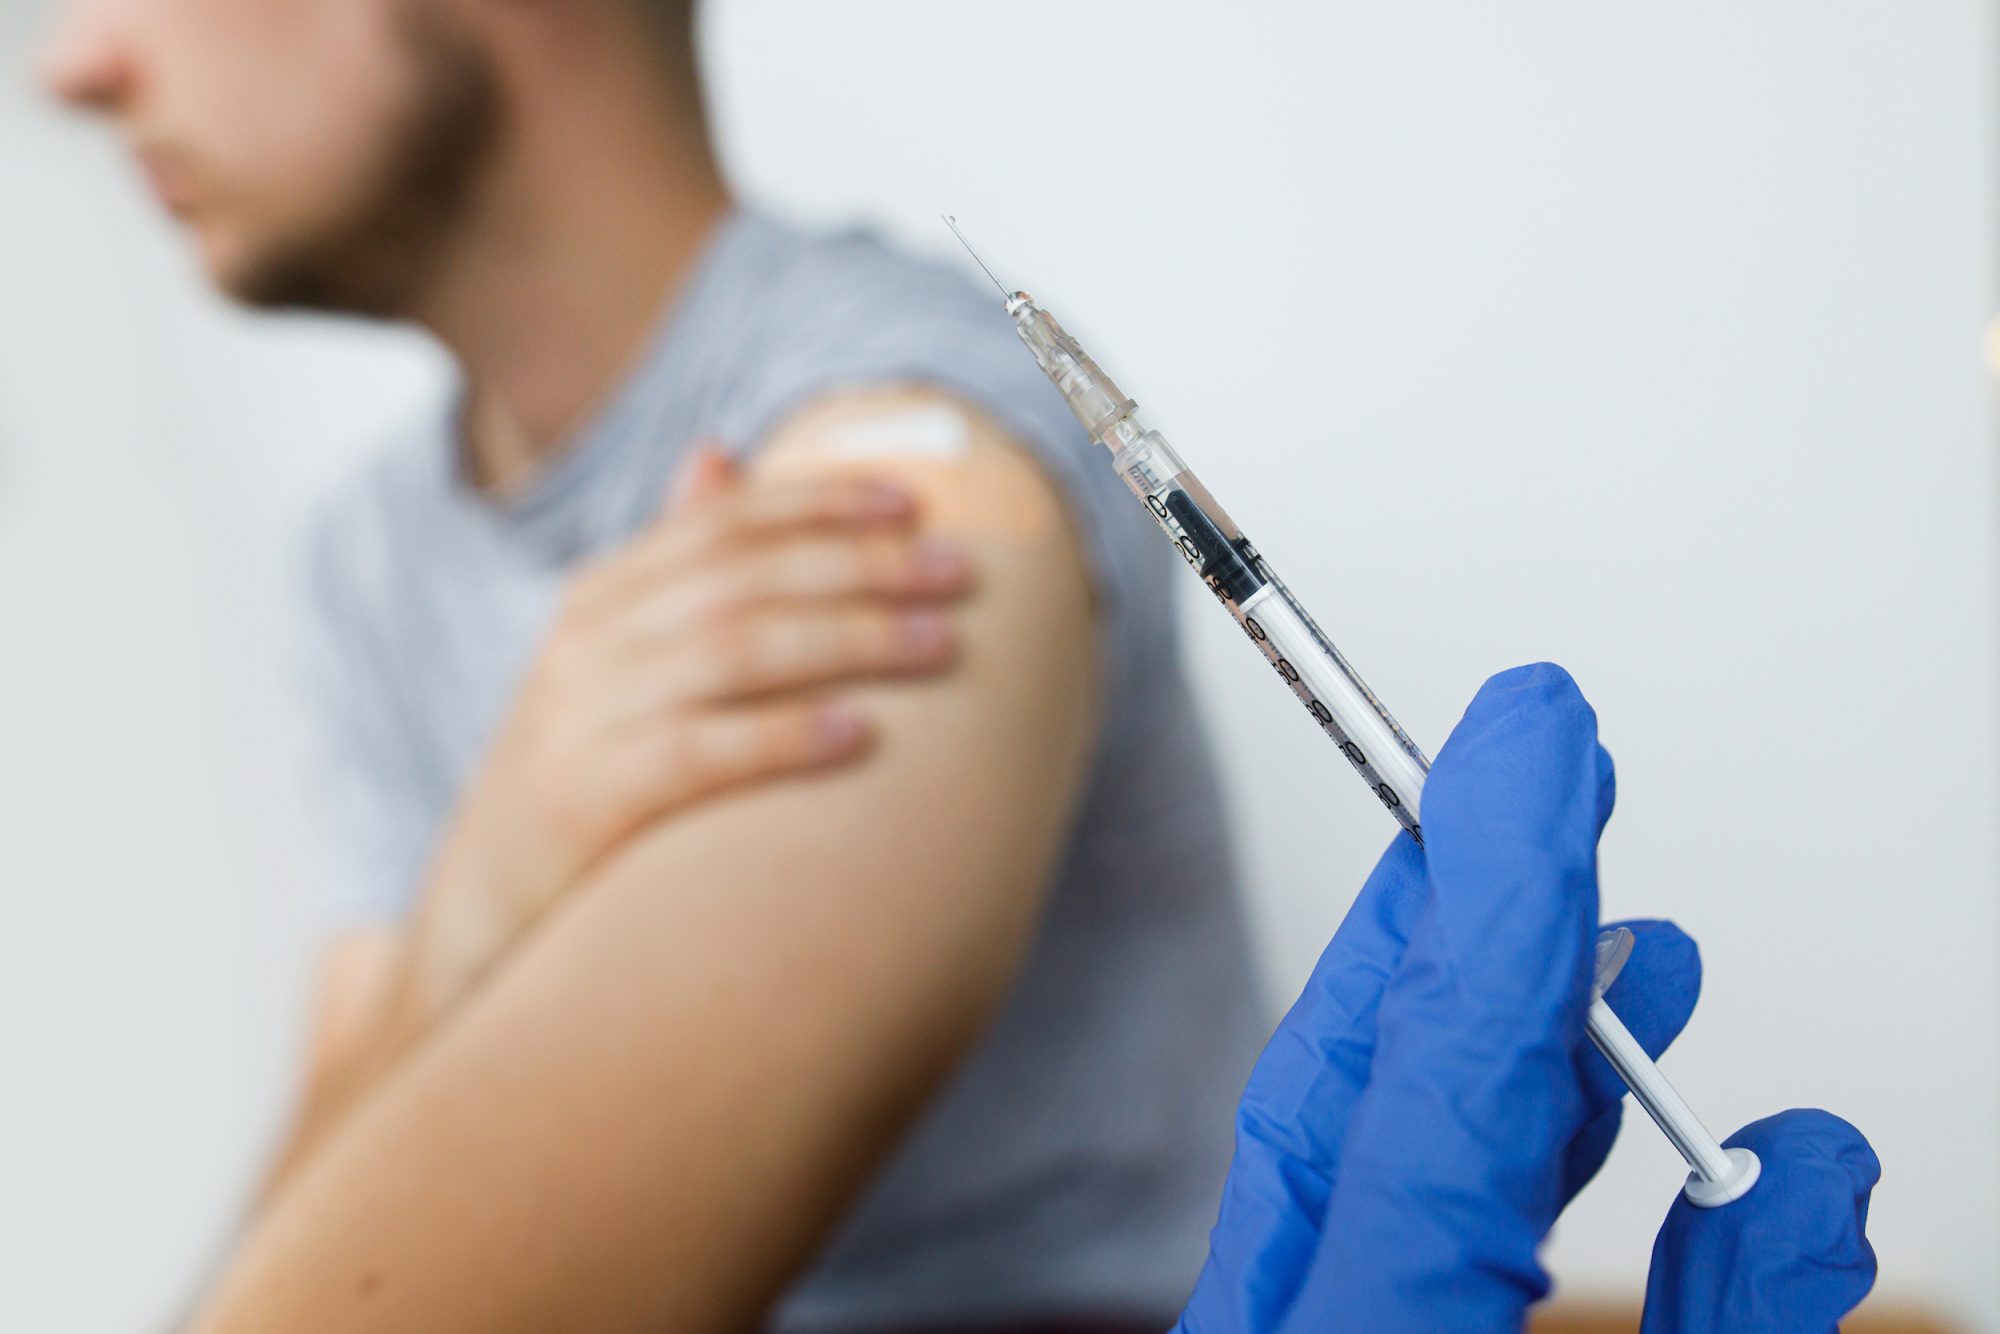 More than 1.58 million people received two doses of Coronavirus vaccine in Qatar